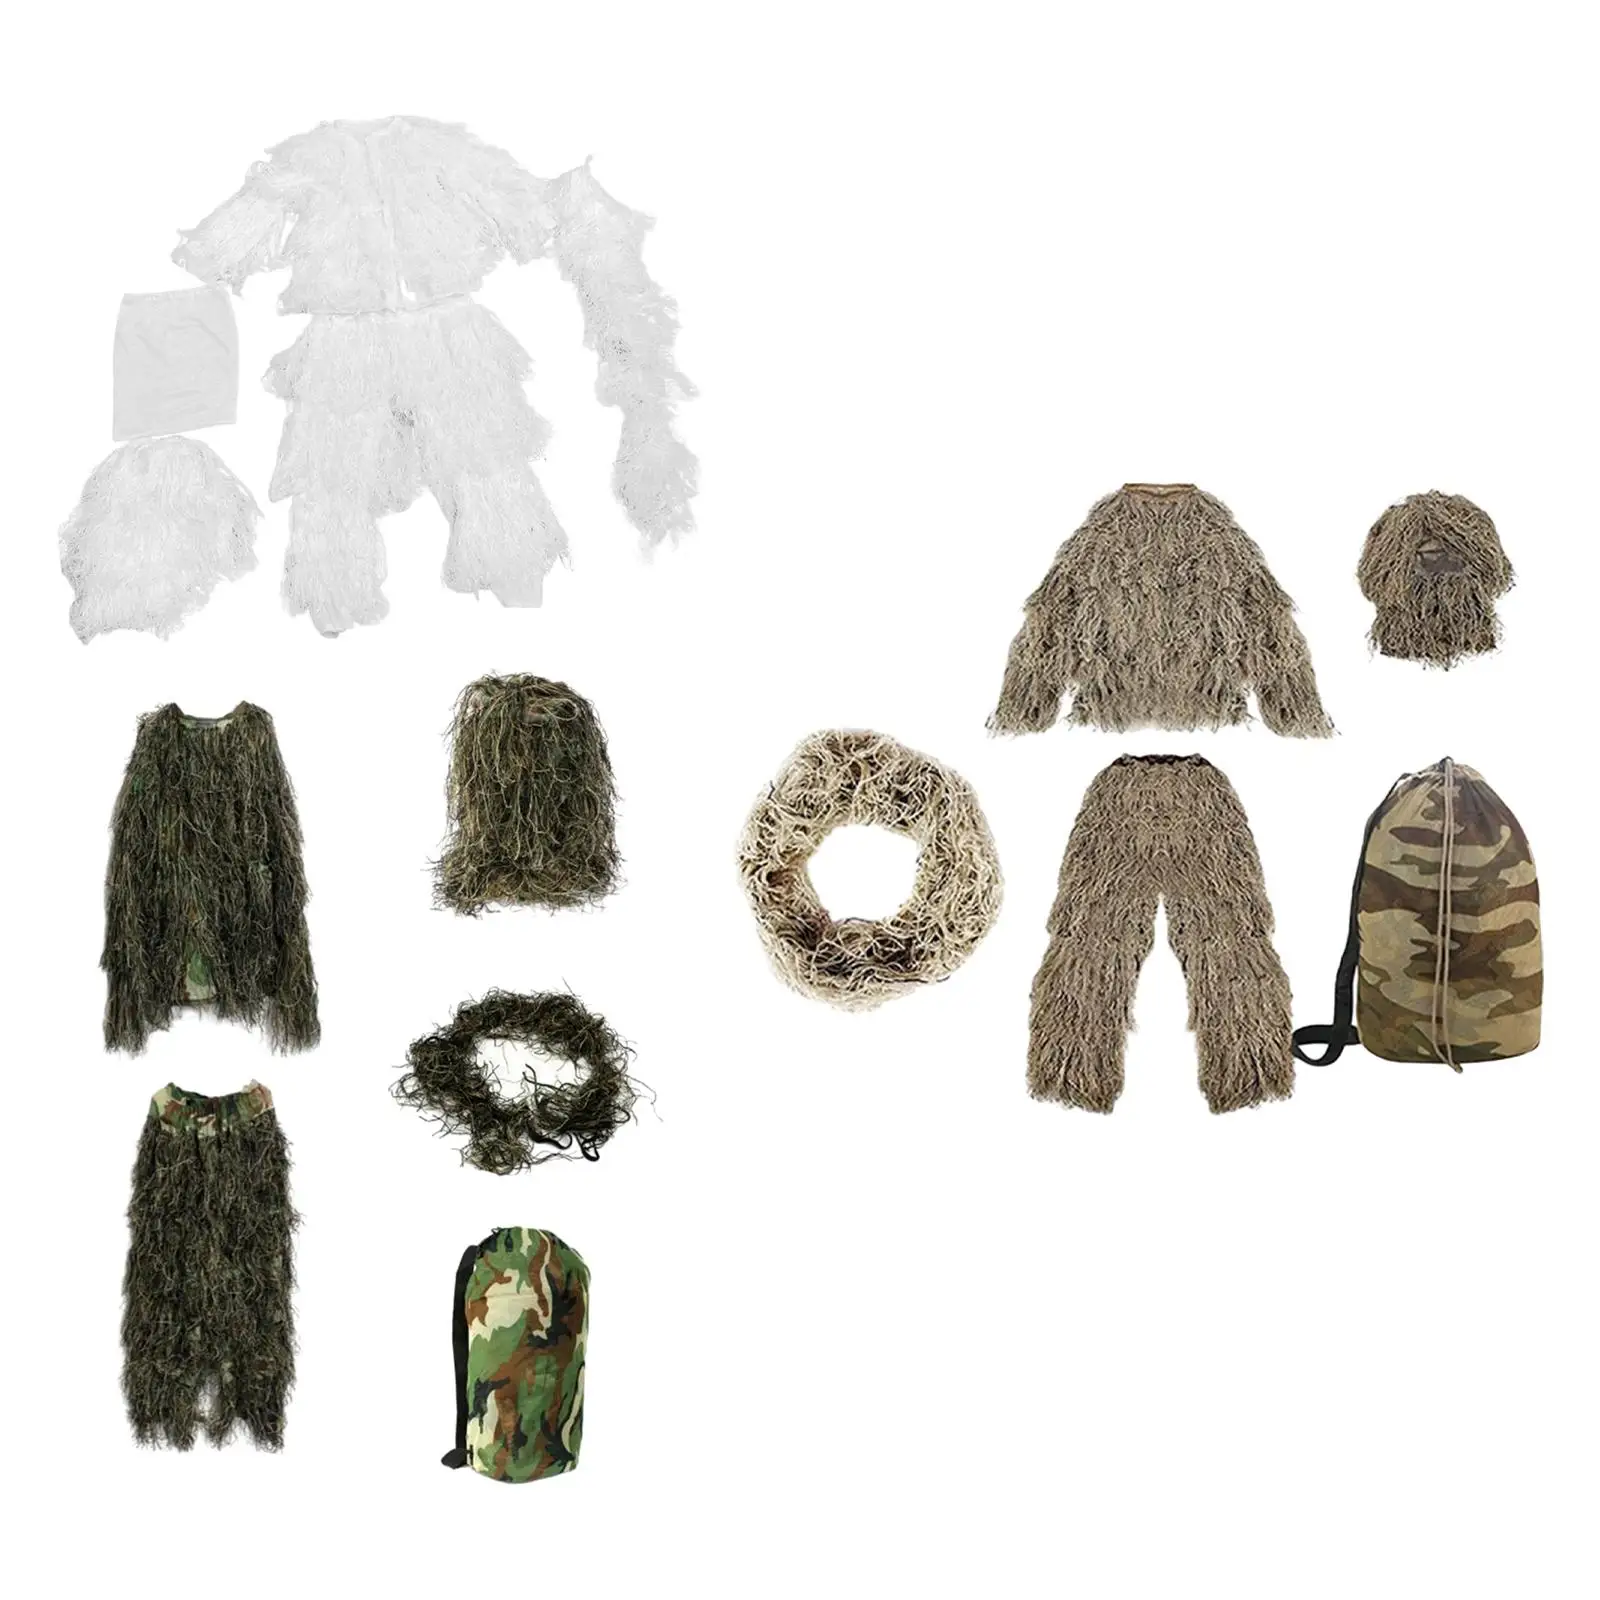 Kids Ghillie Suit Jacket Pants Woodland Clothing Uniform Set Costume for Hunting Bird Watching Jungle Halloween Accessories